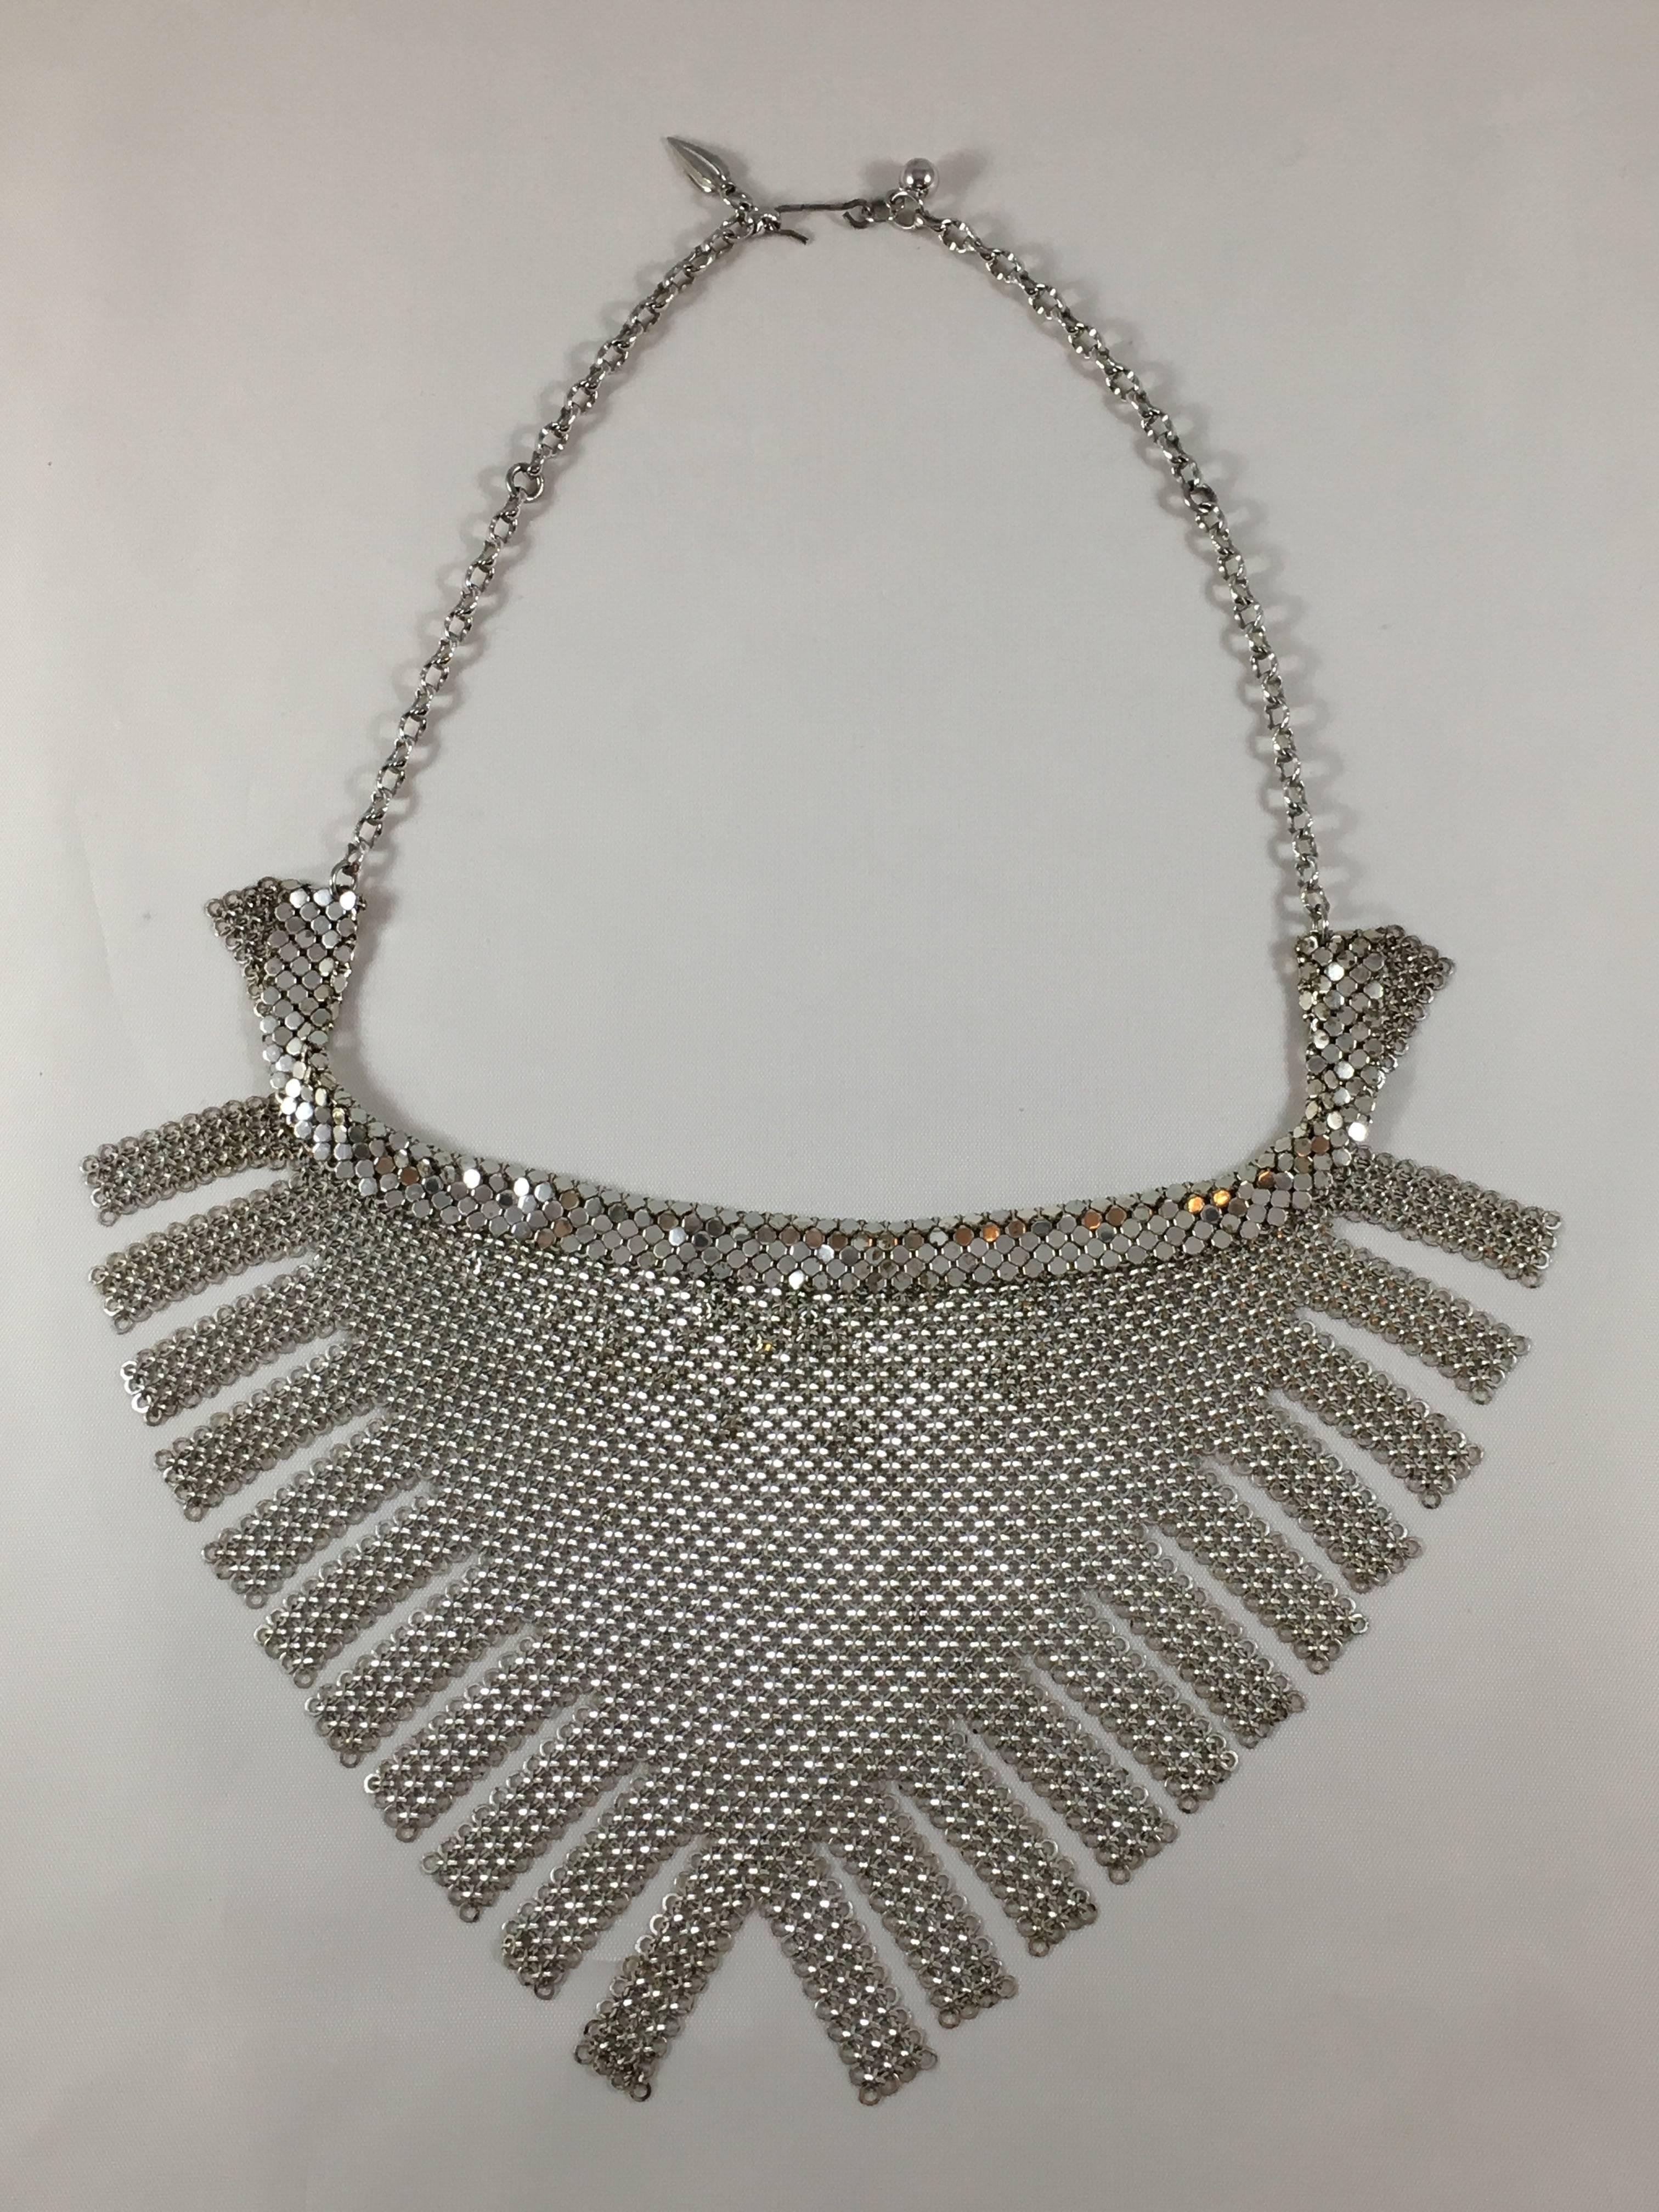 Women's 1970s Whiting and Davis Silver Chainmail Metal Bib Necklace with Fringe For Sale